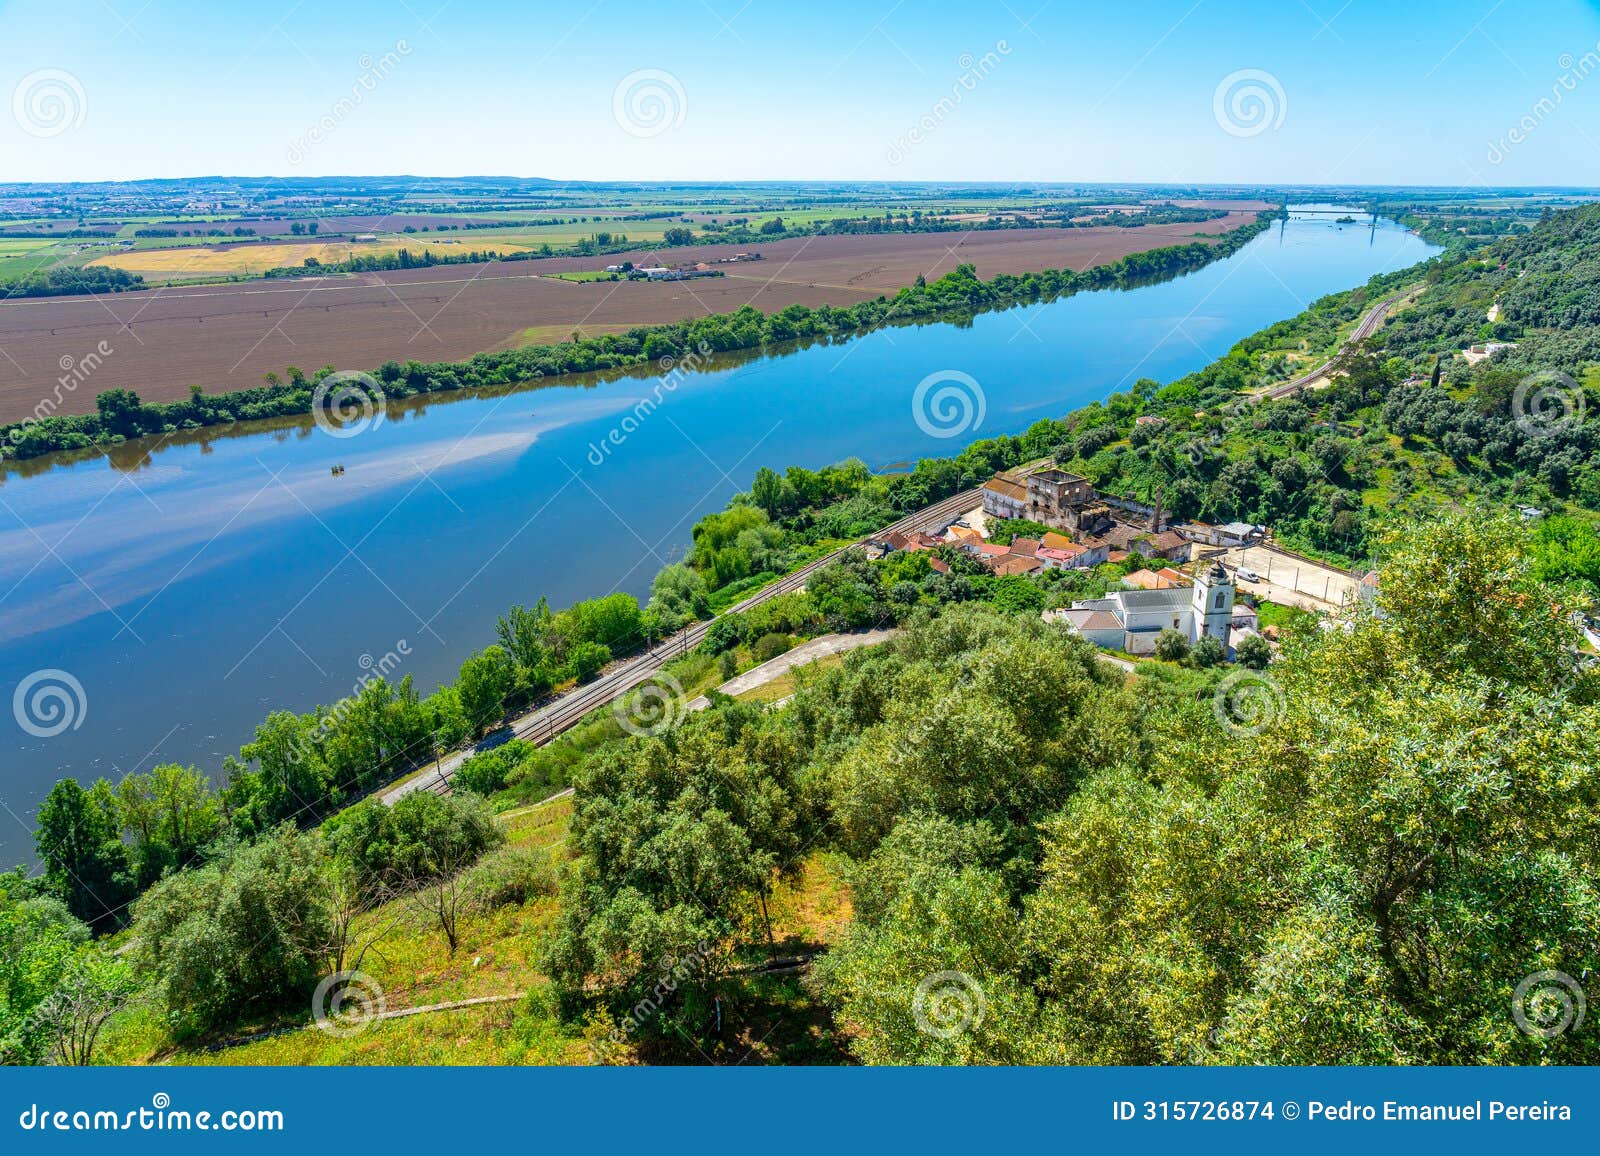 panoramic view of the tagus river from the jardim das portas do sol in the portuguese city of santarem.